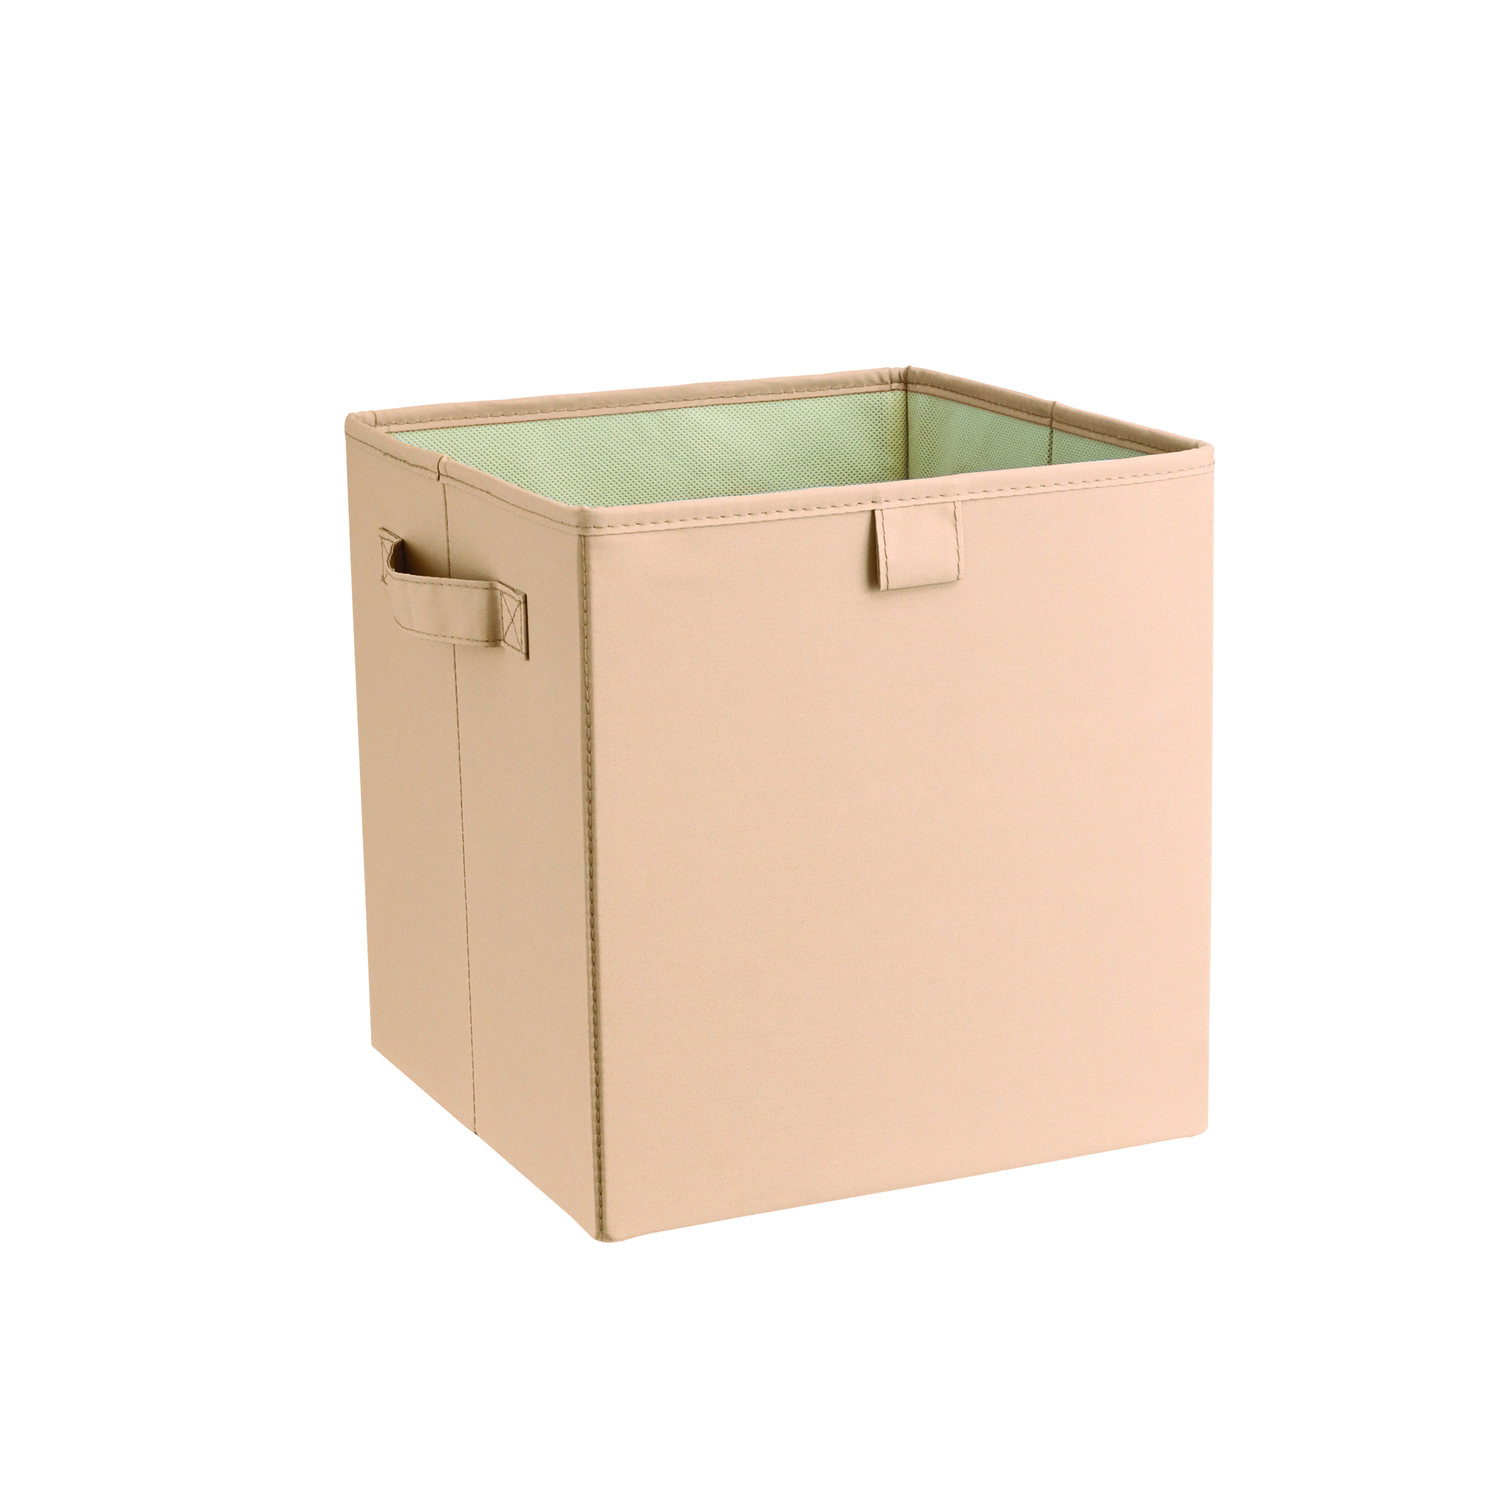 UPC 075381160810 product image for ClosetMaid 11 in. H x 10.5 in. D x 10.5 in. W Fabric Storage Bin | upcitemdb.com